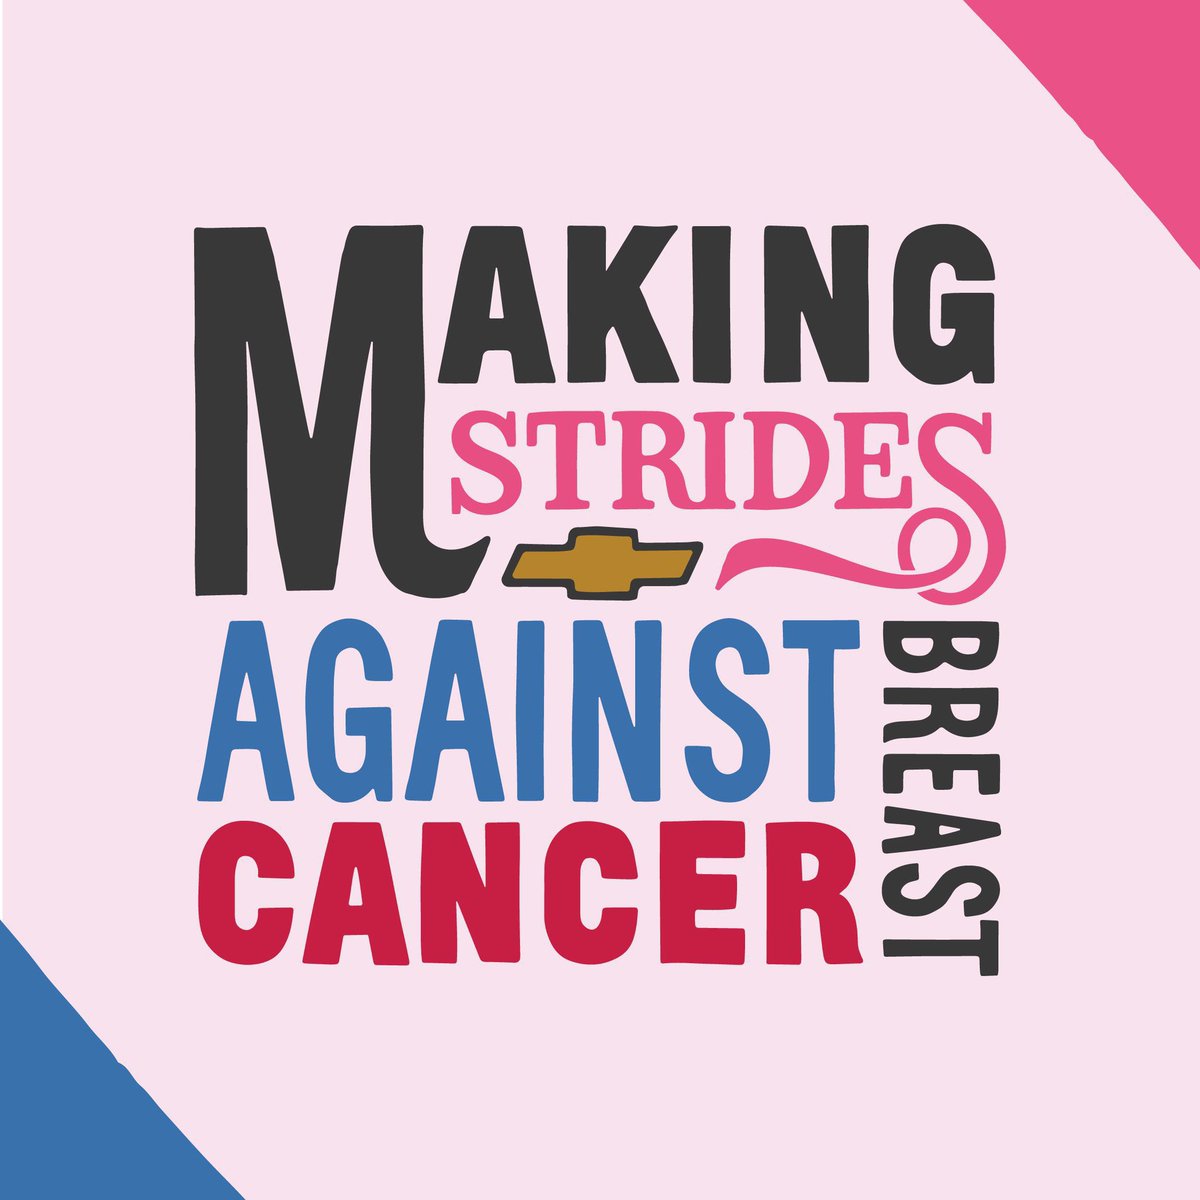 Hi friends! Can you do me a favor and retweet this? This #BreastCancerAwarenessMonth 
@Chevrolet will contribute $5 to @AmericanCancer
for every use of #WeDriveFor. Your RT of this tweet = $5 to the #AmericanCancerSociety 
#pittsburgh #makingstridesagainstbreastcancer